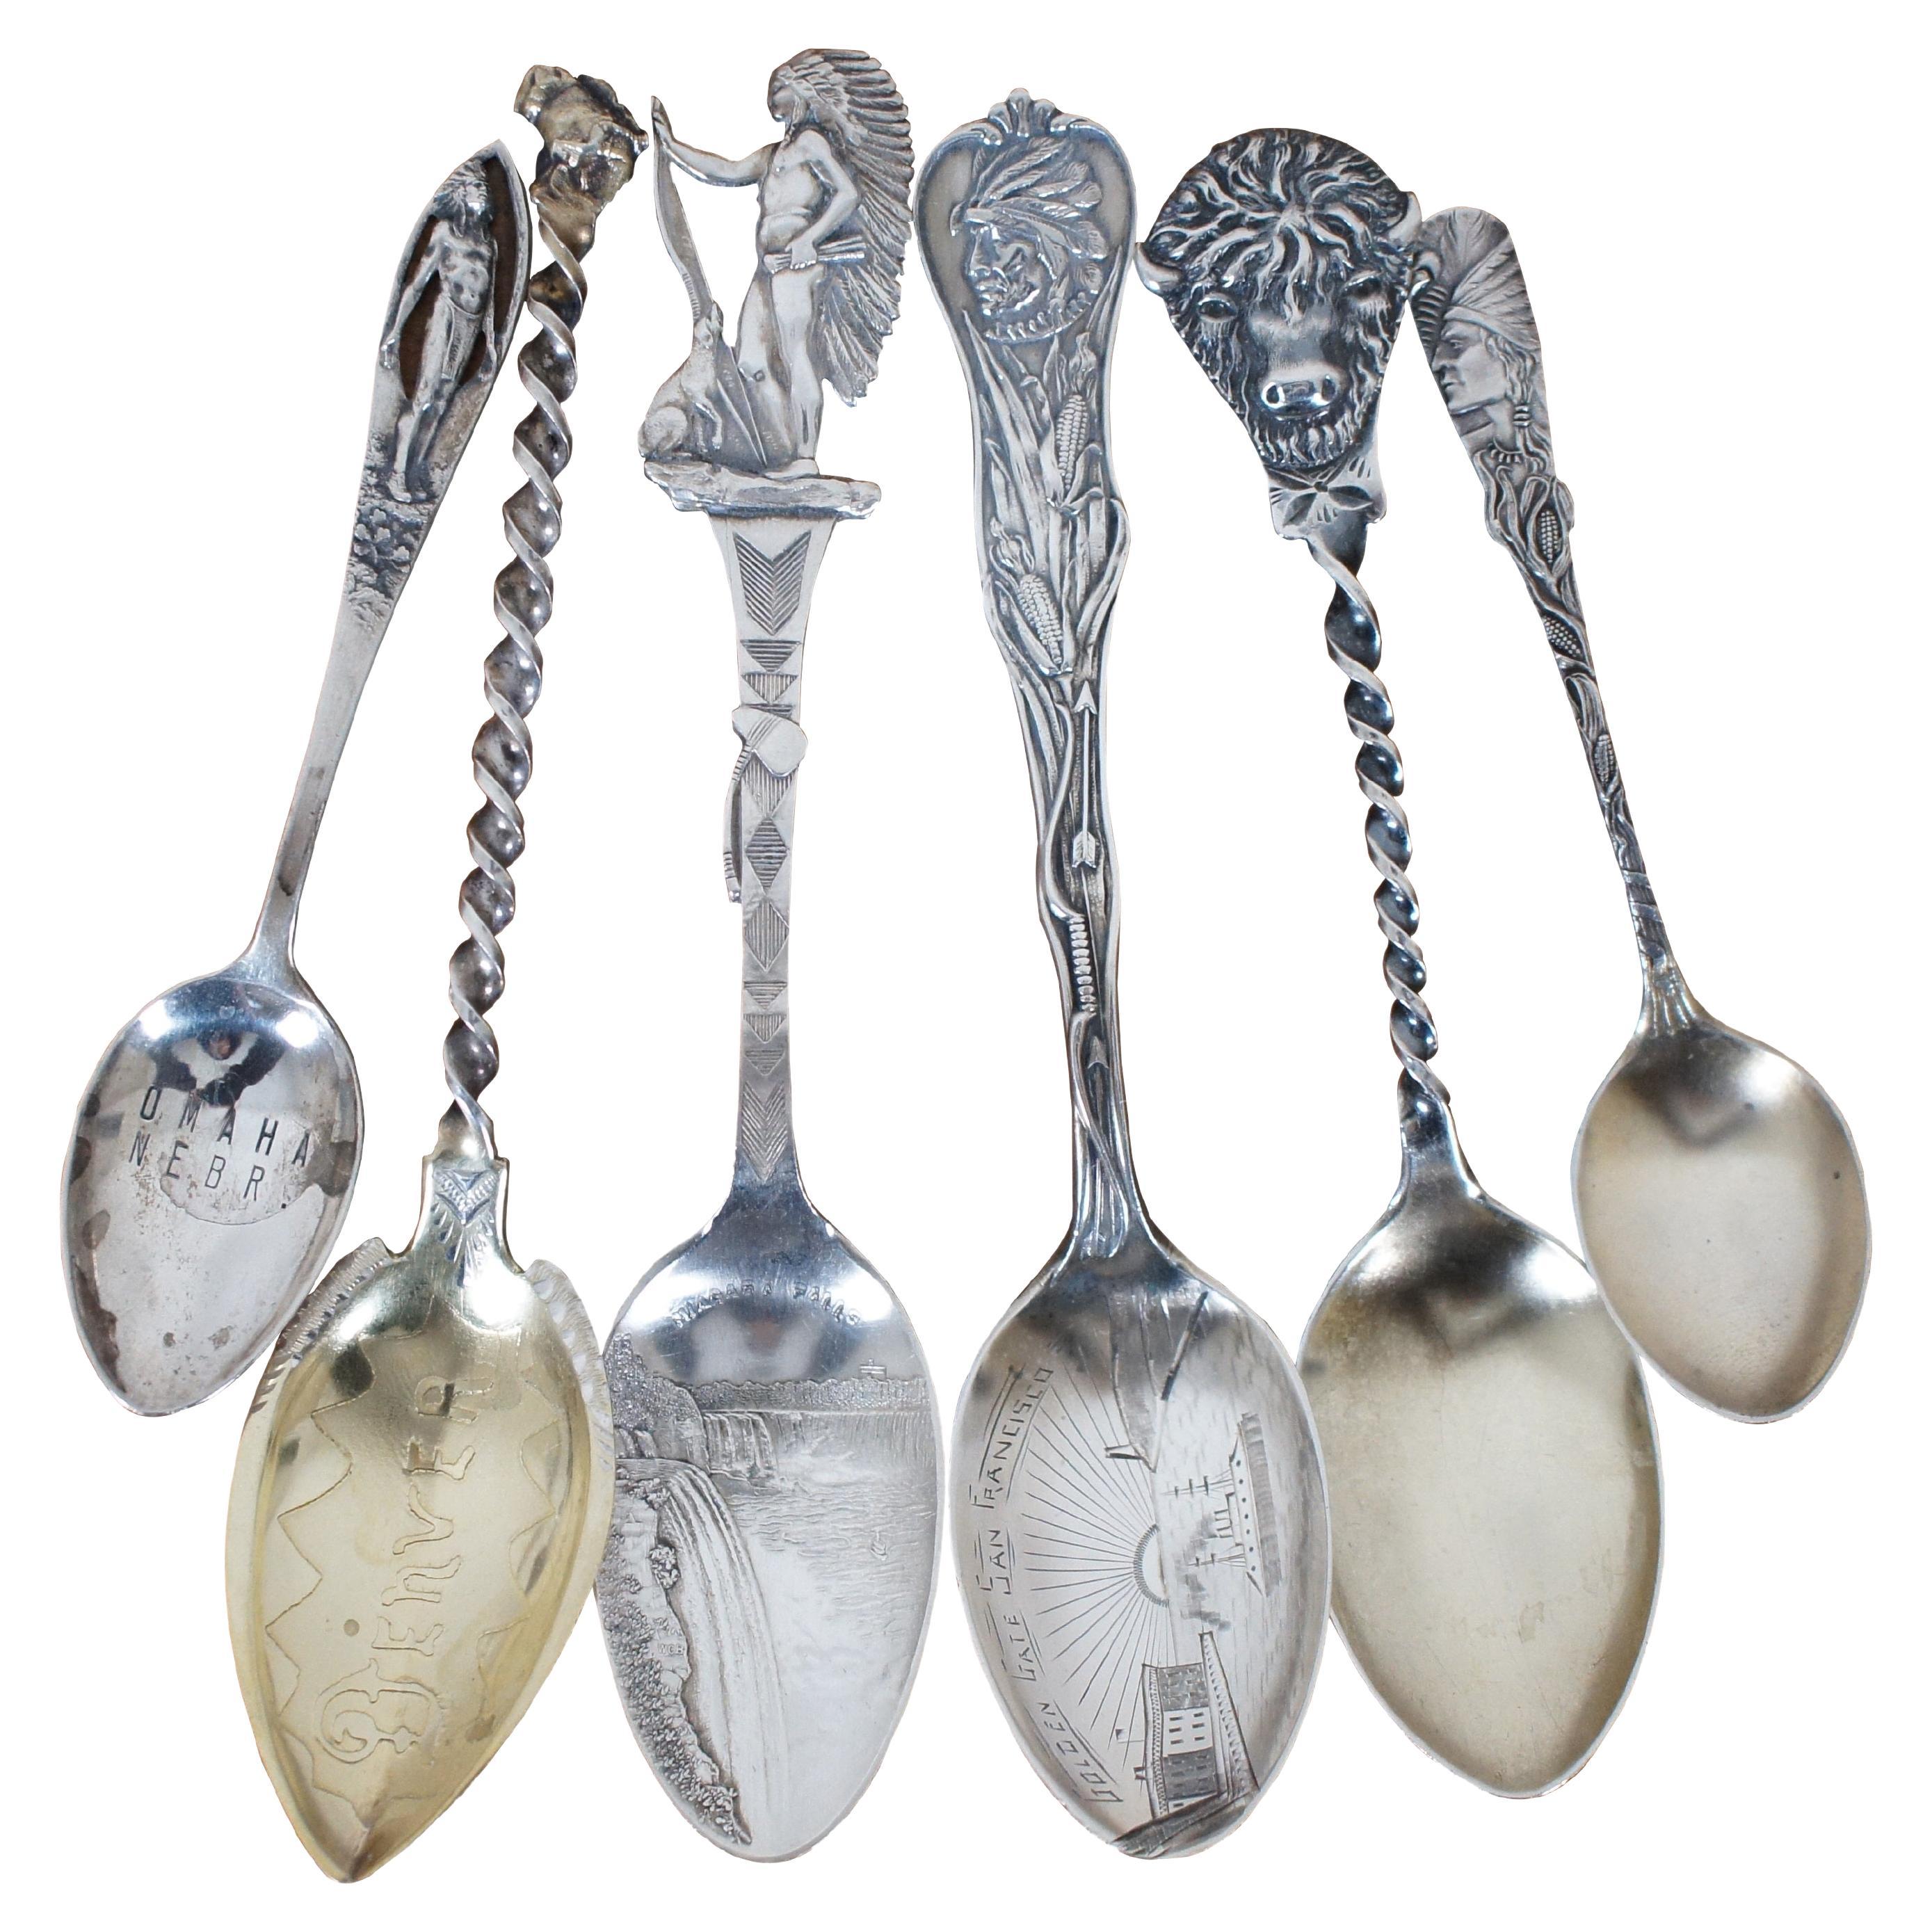 6 Antique Assorted Native American Sterling Silver Souvenir Spoons 93g